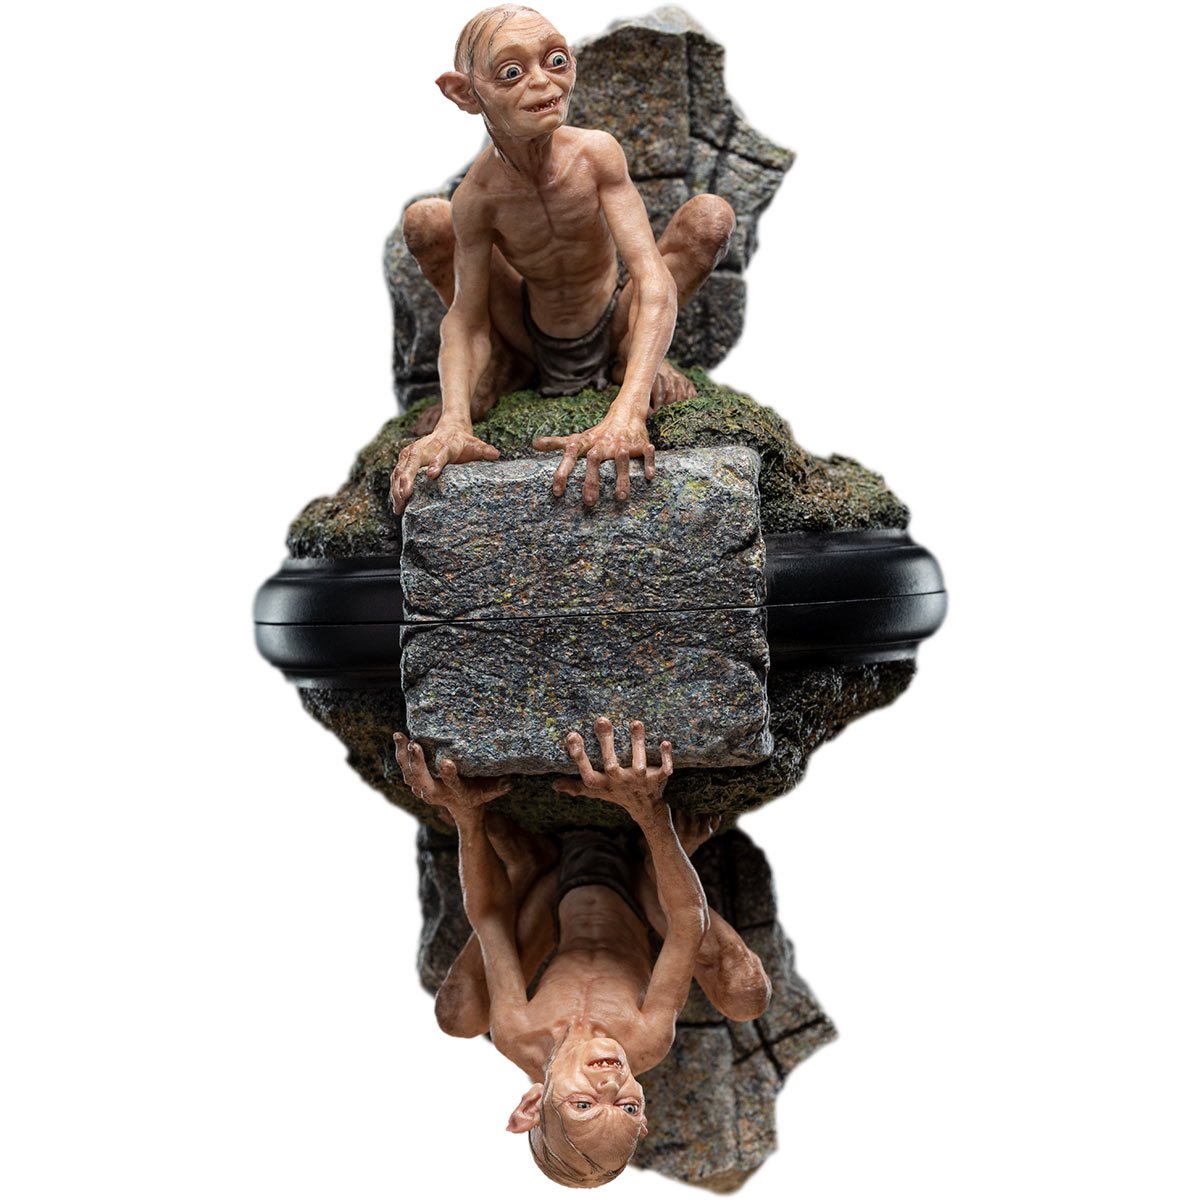 gollum and smeagol difference